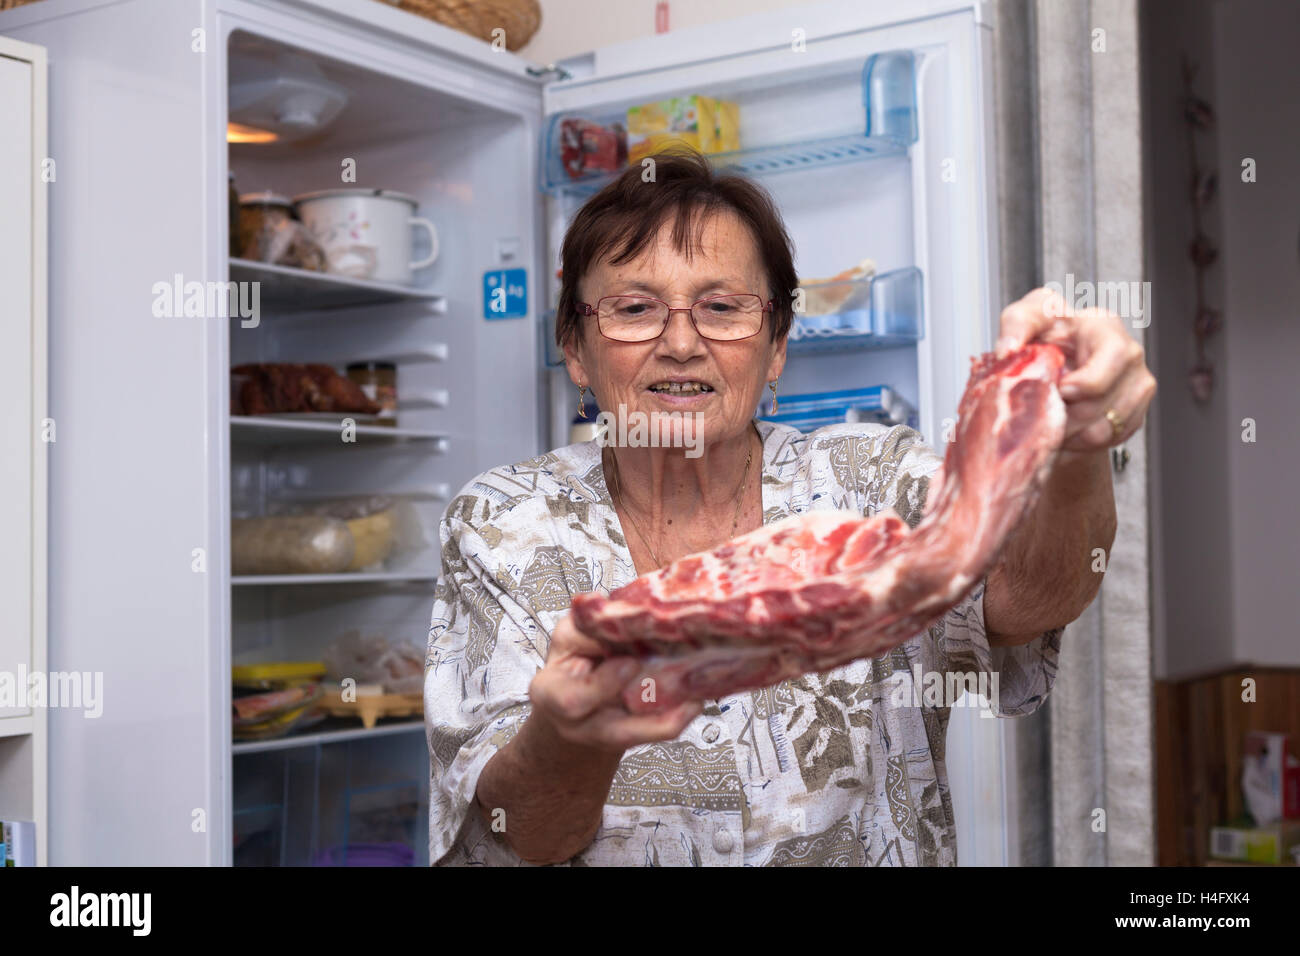 Senior woman holding raw pork ribs while standing in front of the open fridge in the kitchen. Stock Photo